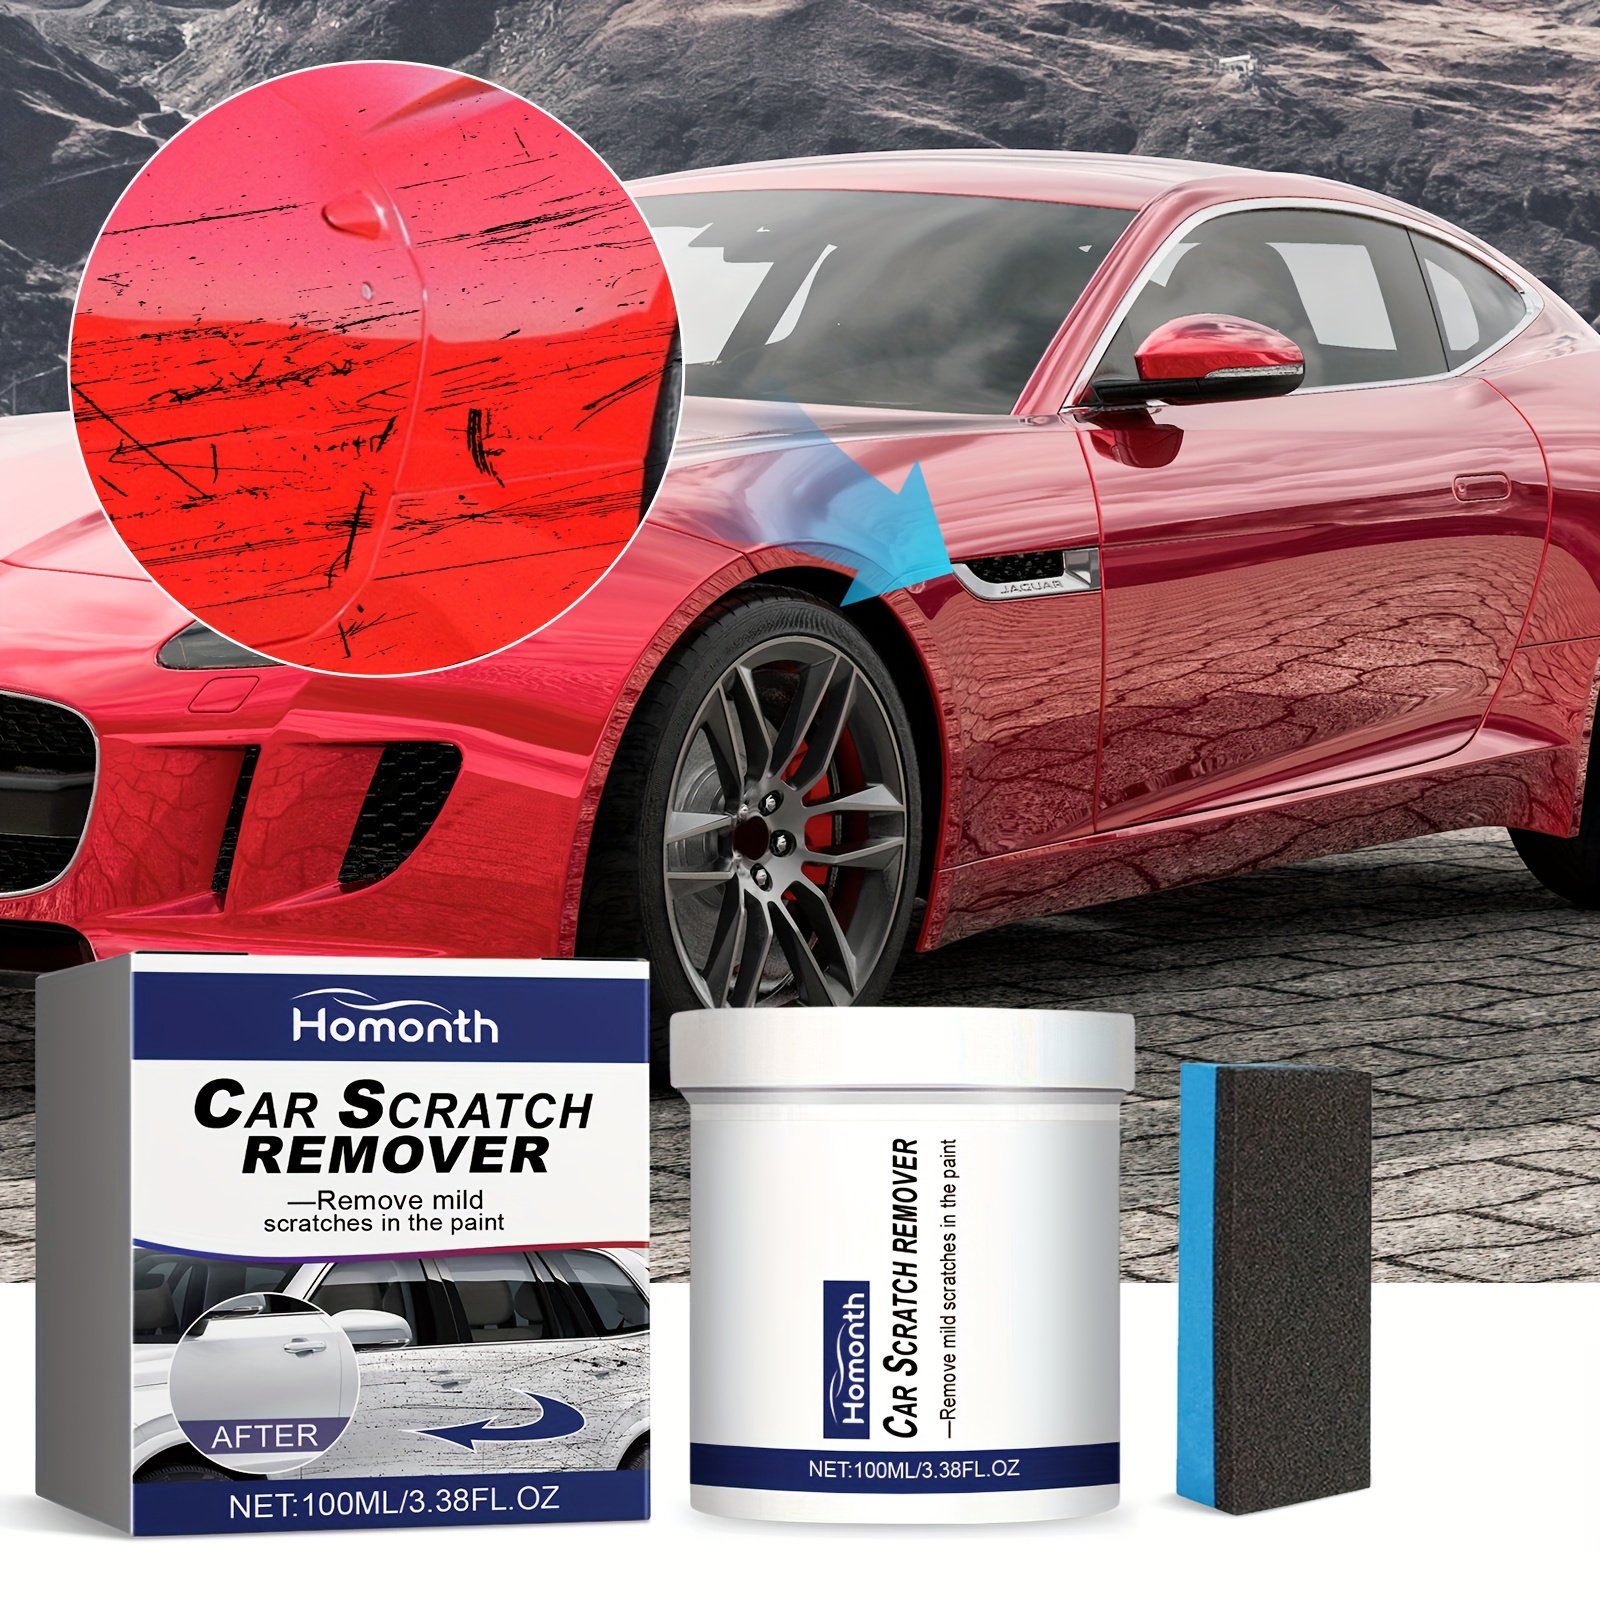 

Homonth Car Scratch Remover Kit - Universal Auto Paint Scratch Repair Polish & Wax Set With Sponge, Deep Scratch Removal For All Car Paint Surfaces